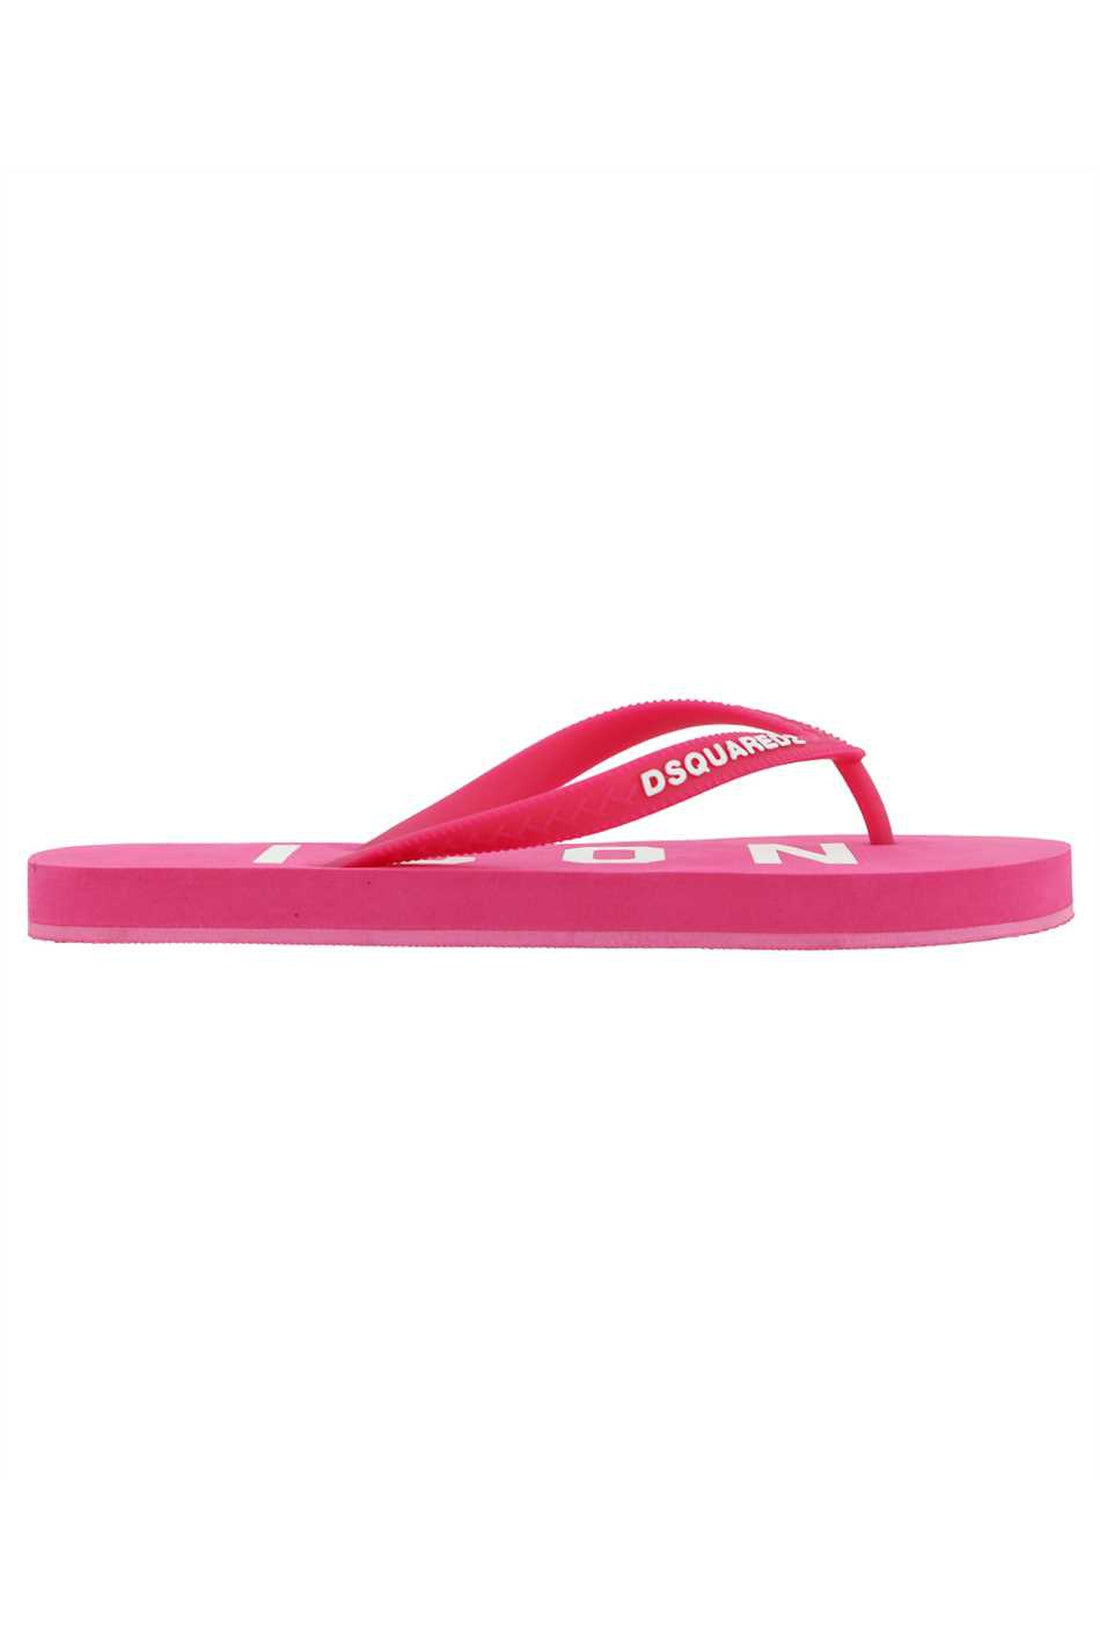 Dsquared2-OUTLET-SALE-Be Icon rubber thong-sandals-ARCHIVIST